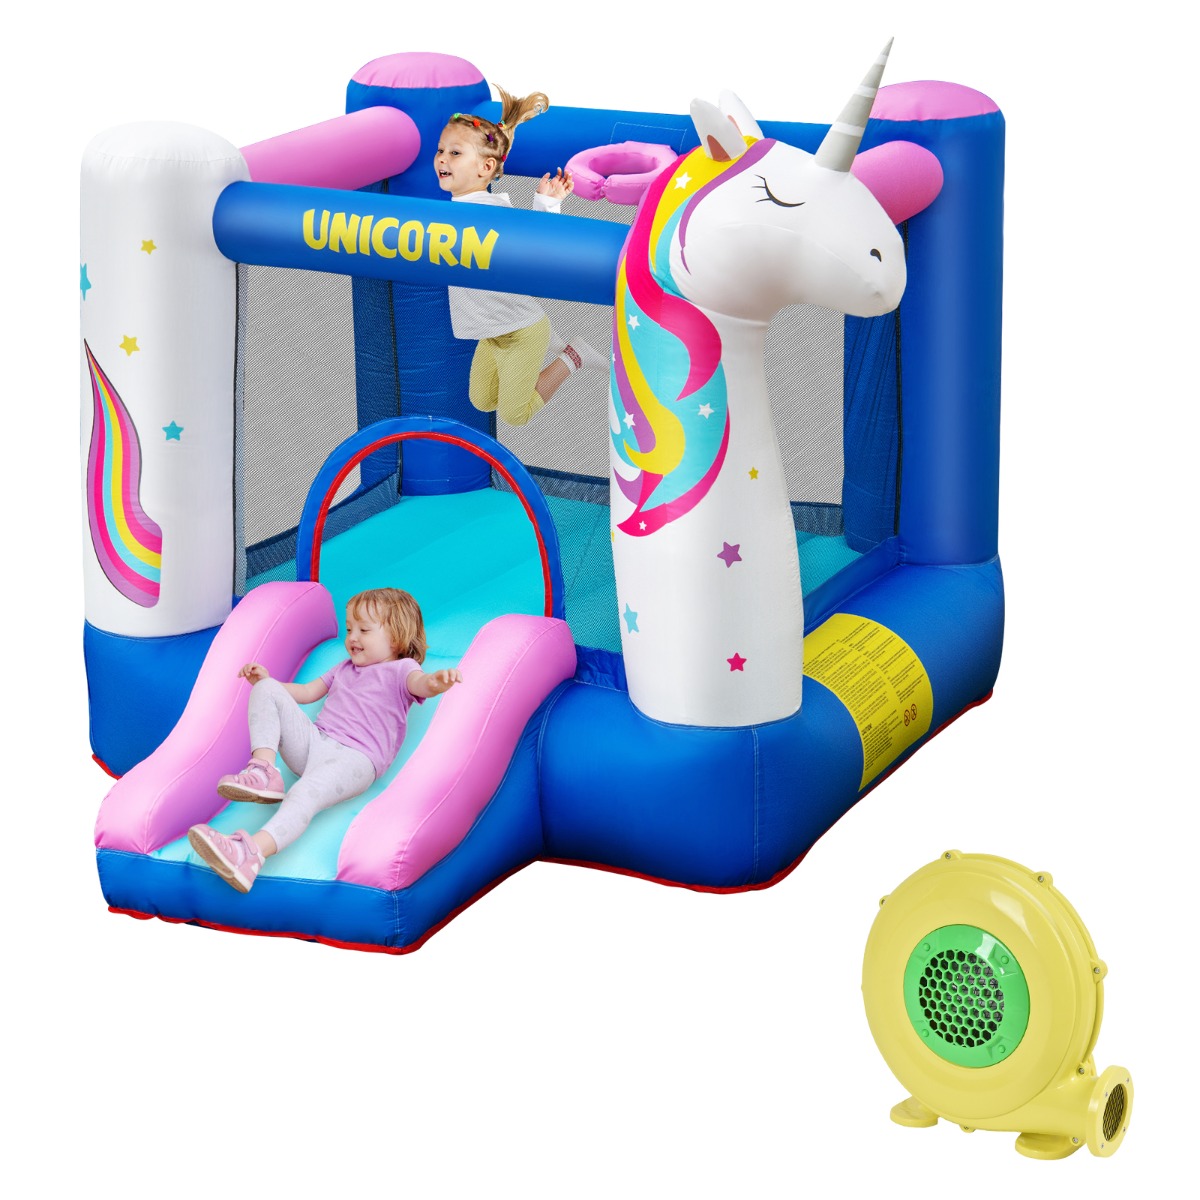 Inflatable Unicorn Theme Bounce House with Slide & Basketball Hoop (with Blower)